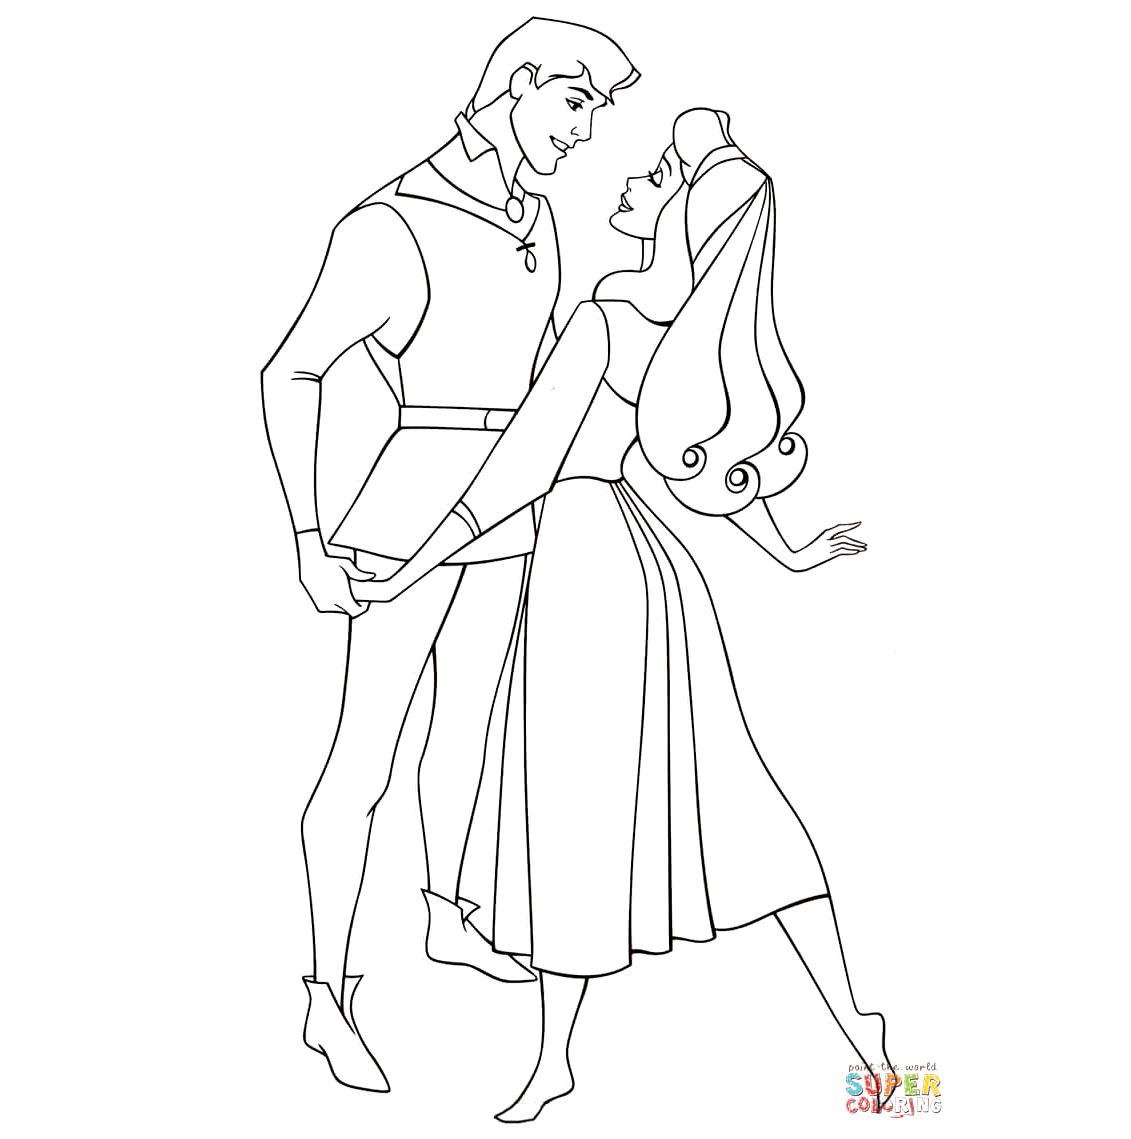 Cinderella With The Prince from Cinderella Coloring Pages